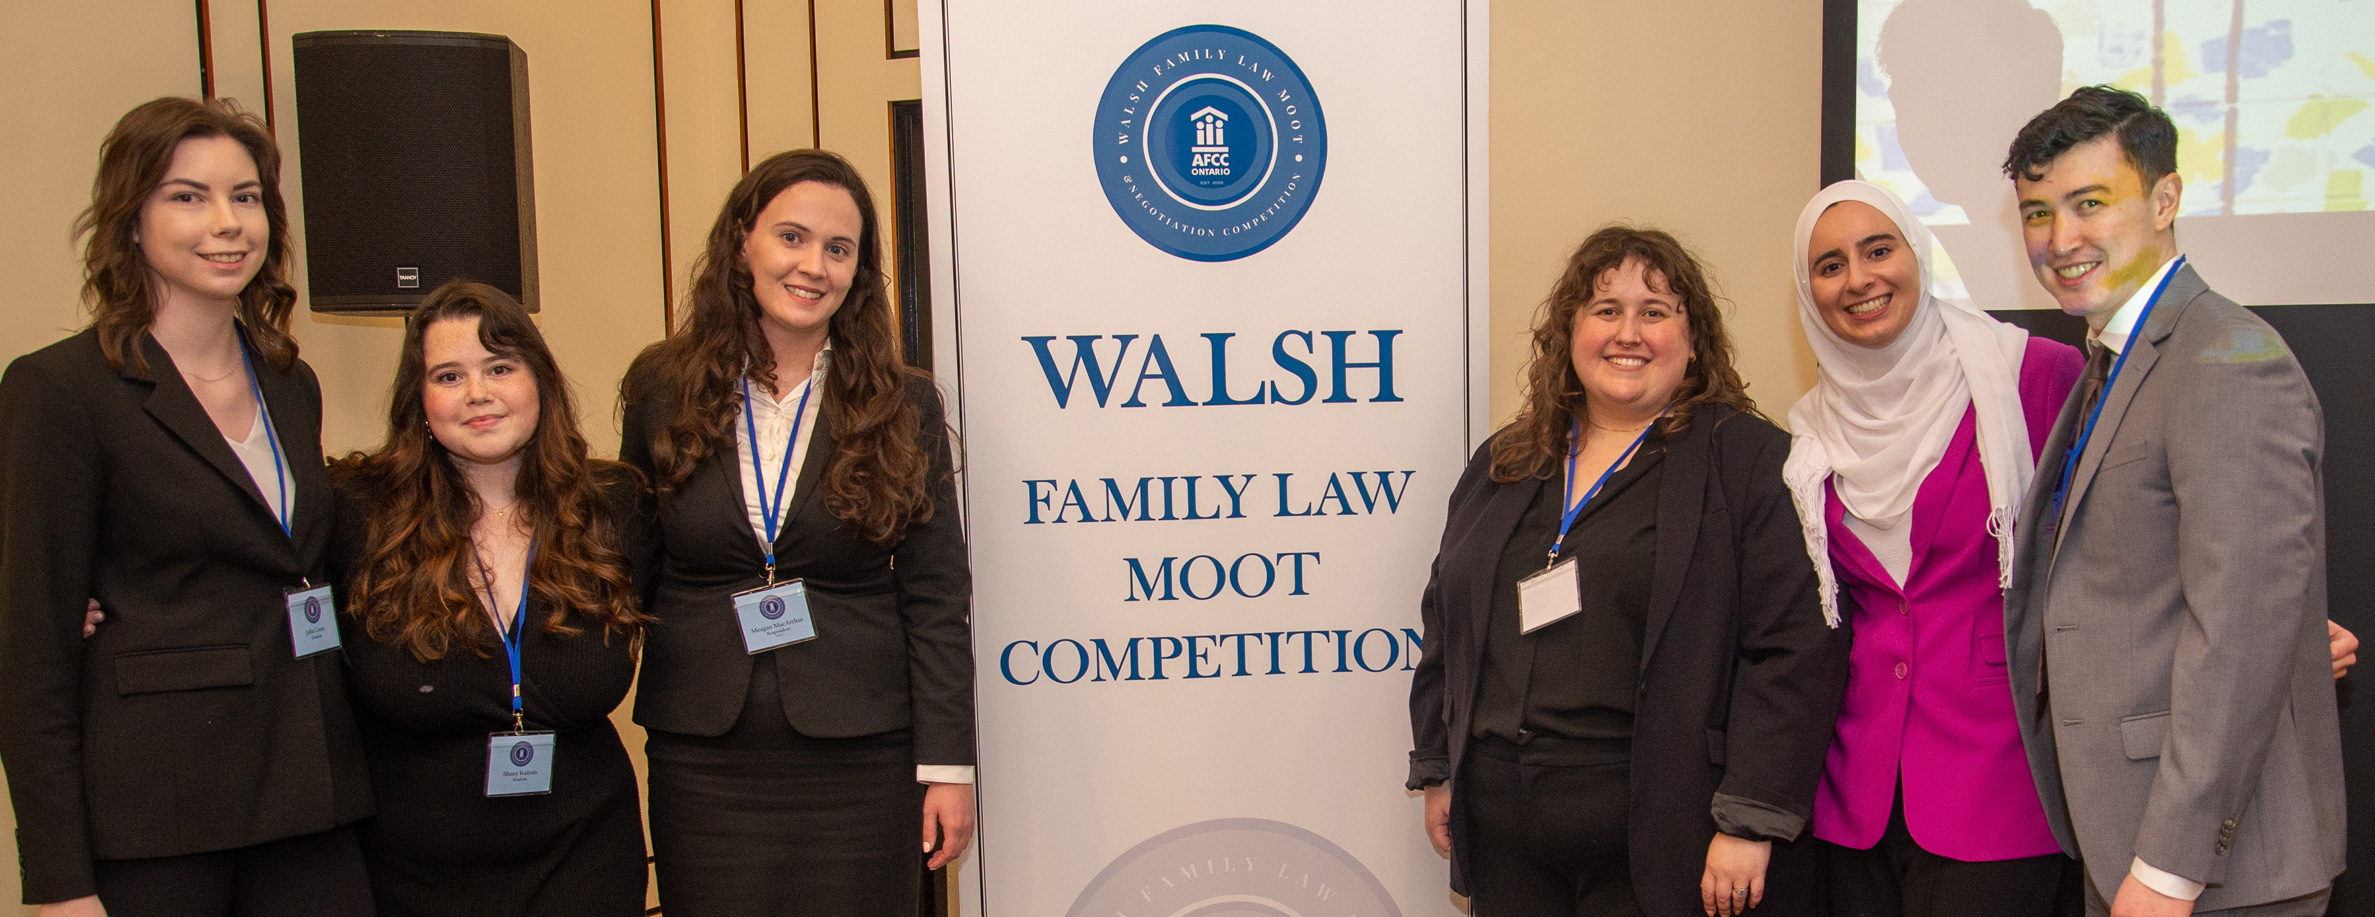 Student winners standing near the banner "Walsh Family Law Moot Competition"